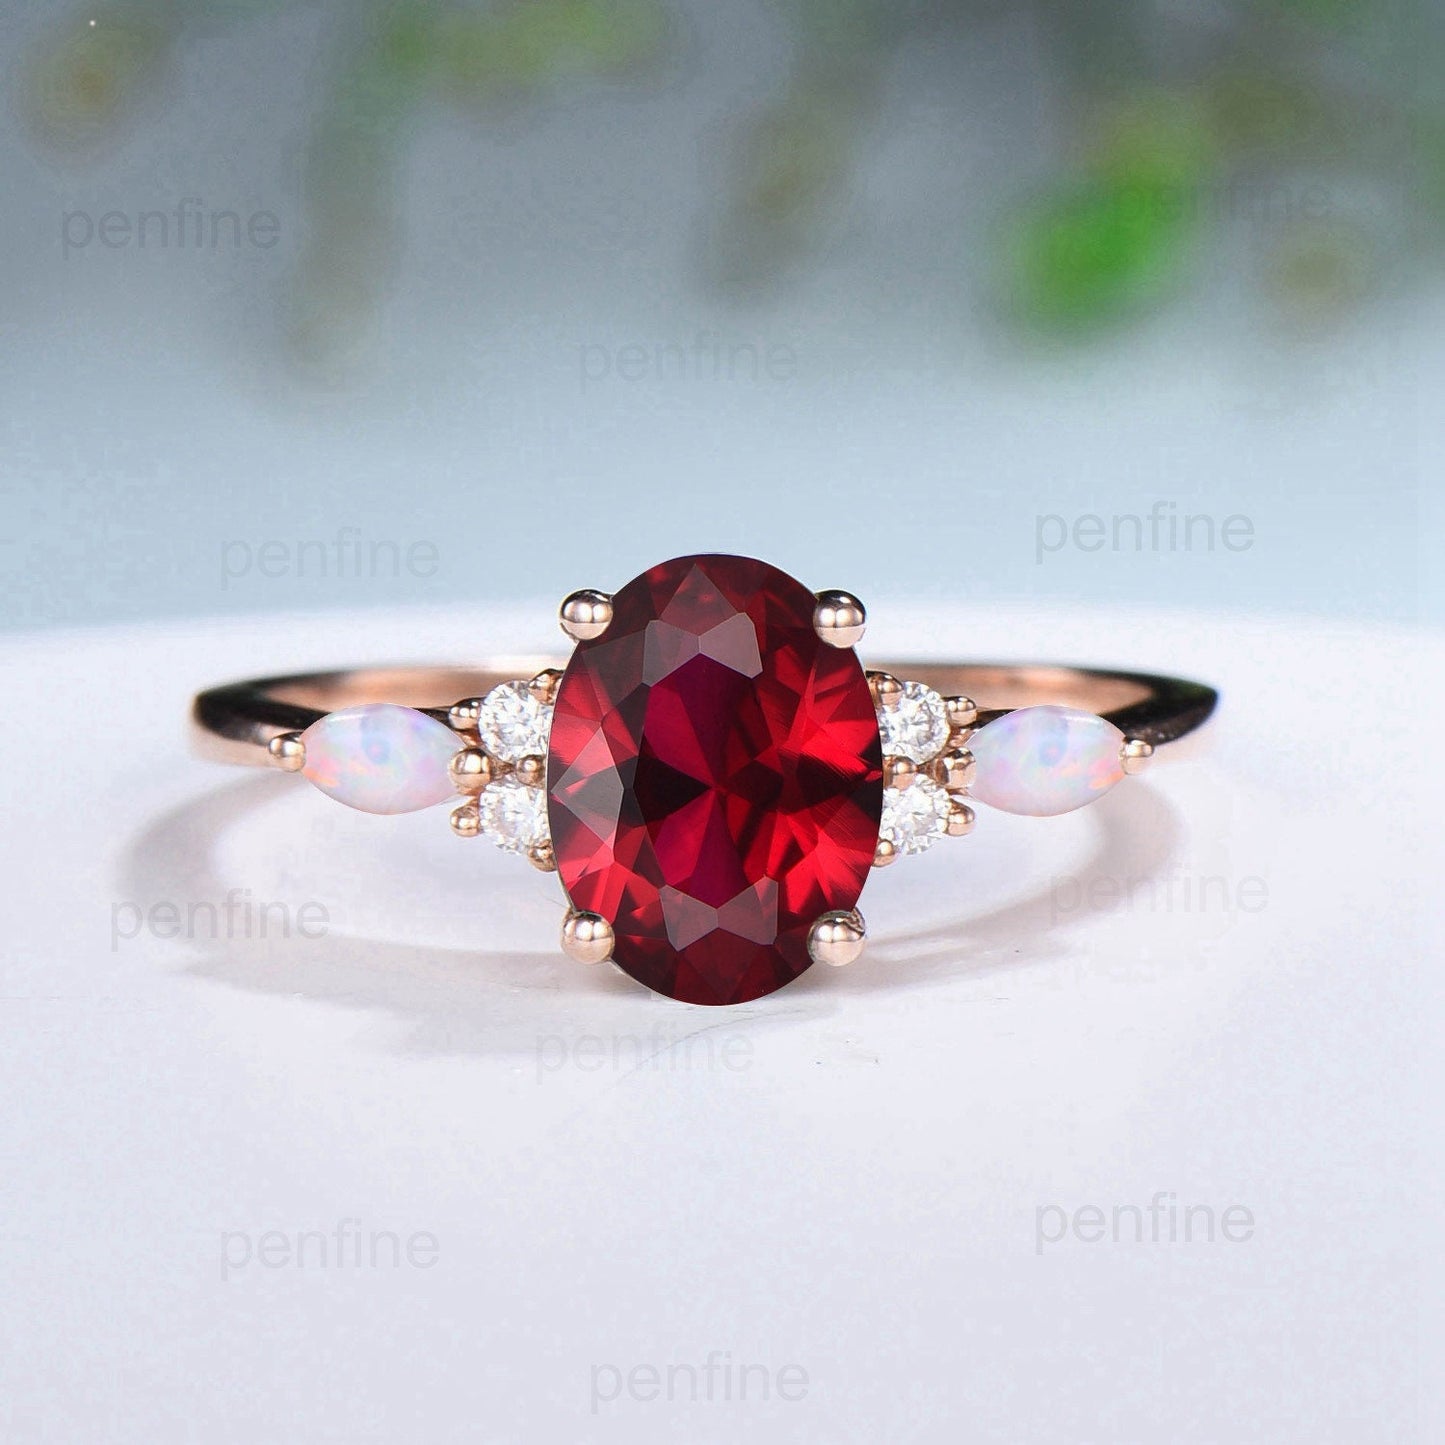 Retro Oval Ruby Engagement Ring Set Vintage Marquise White Opal Wedding Ring Double Curved Lab Ruby Moissanite Stacking Bridal Set for Women - PENFINE